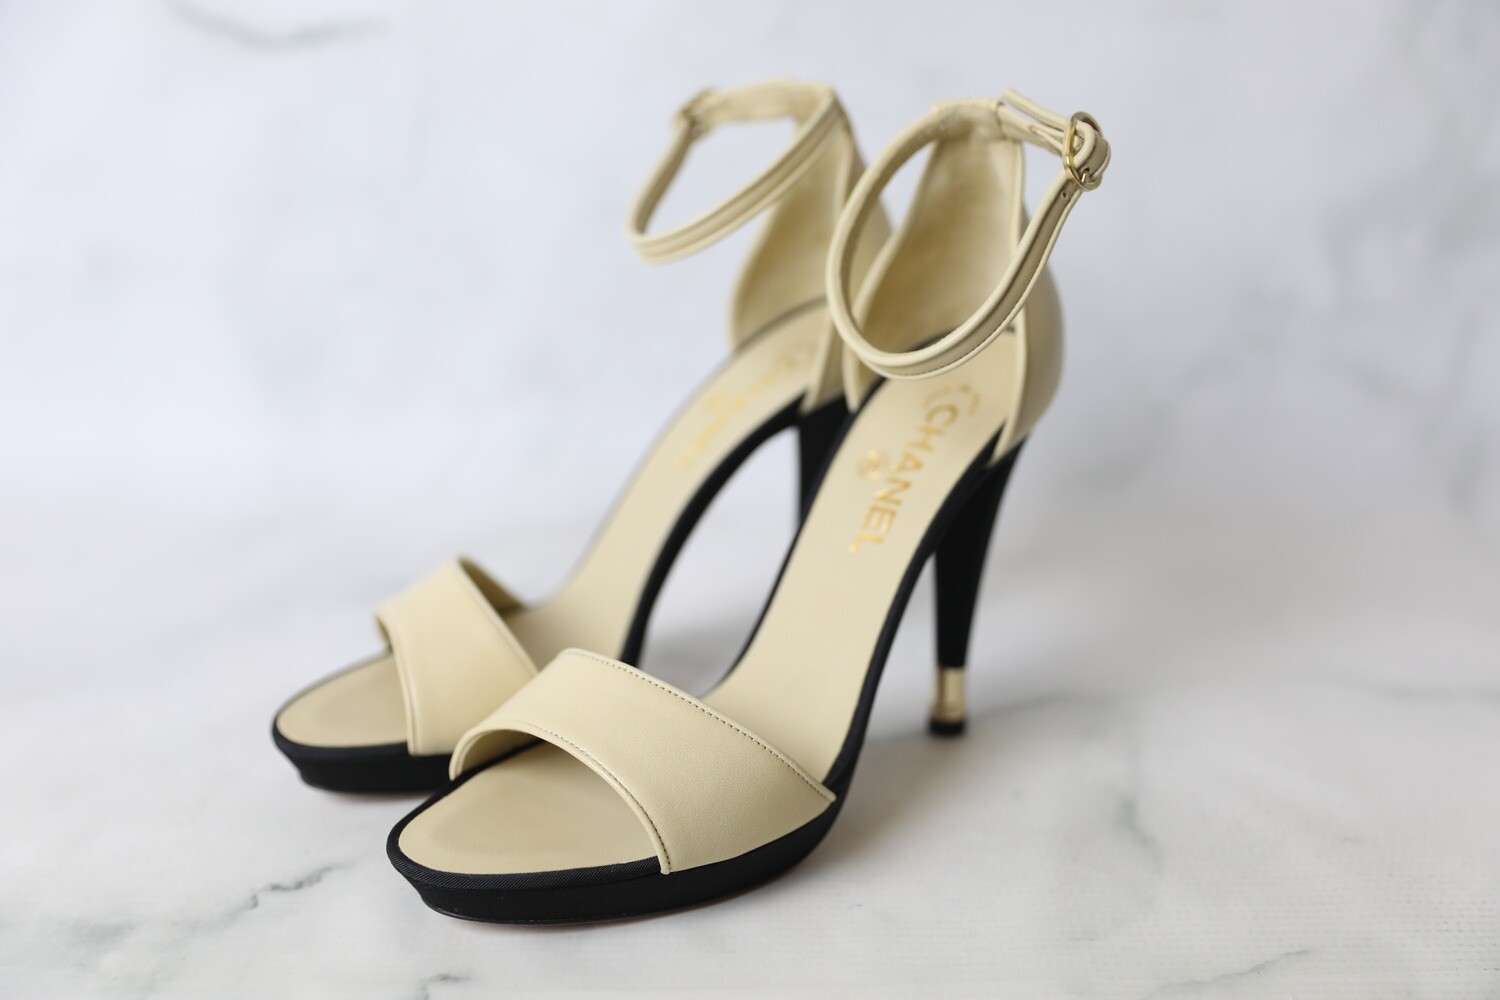 Chanel Shoes, Black and Cream Sandals with Heel, Size 40, New in Box WA001